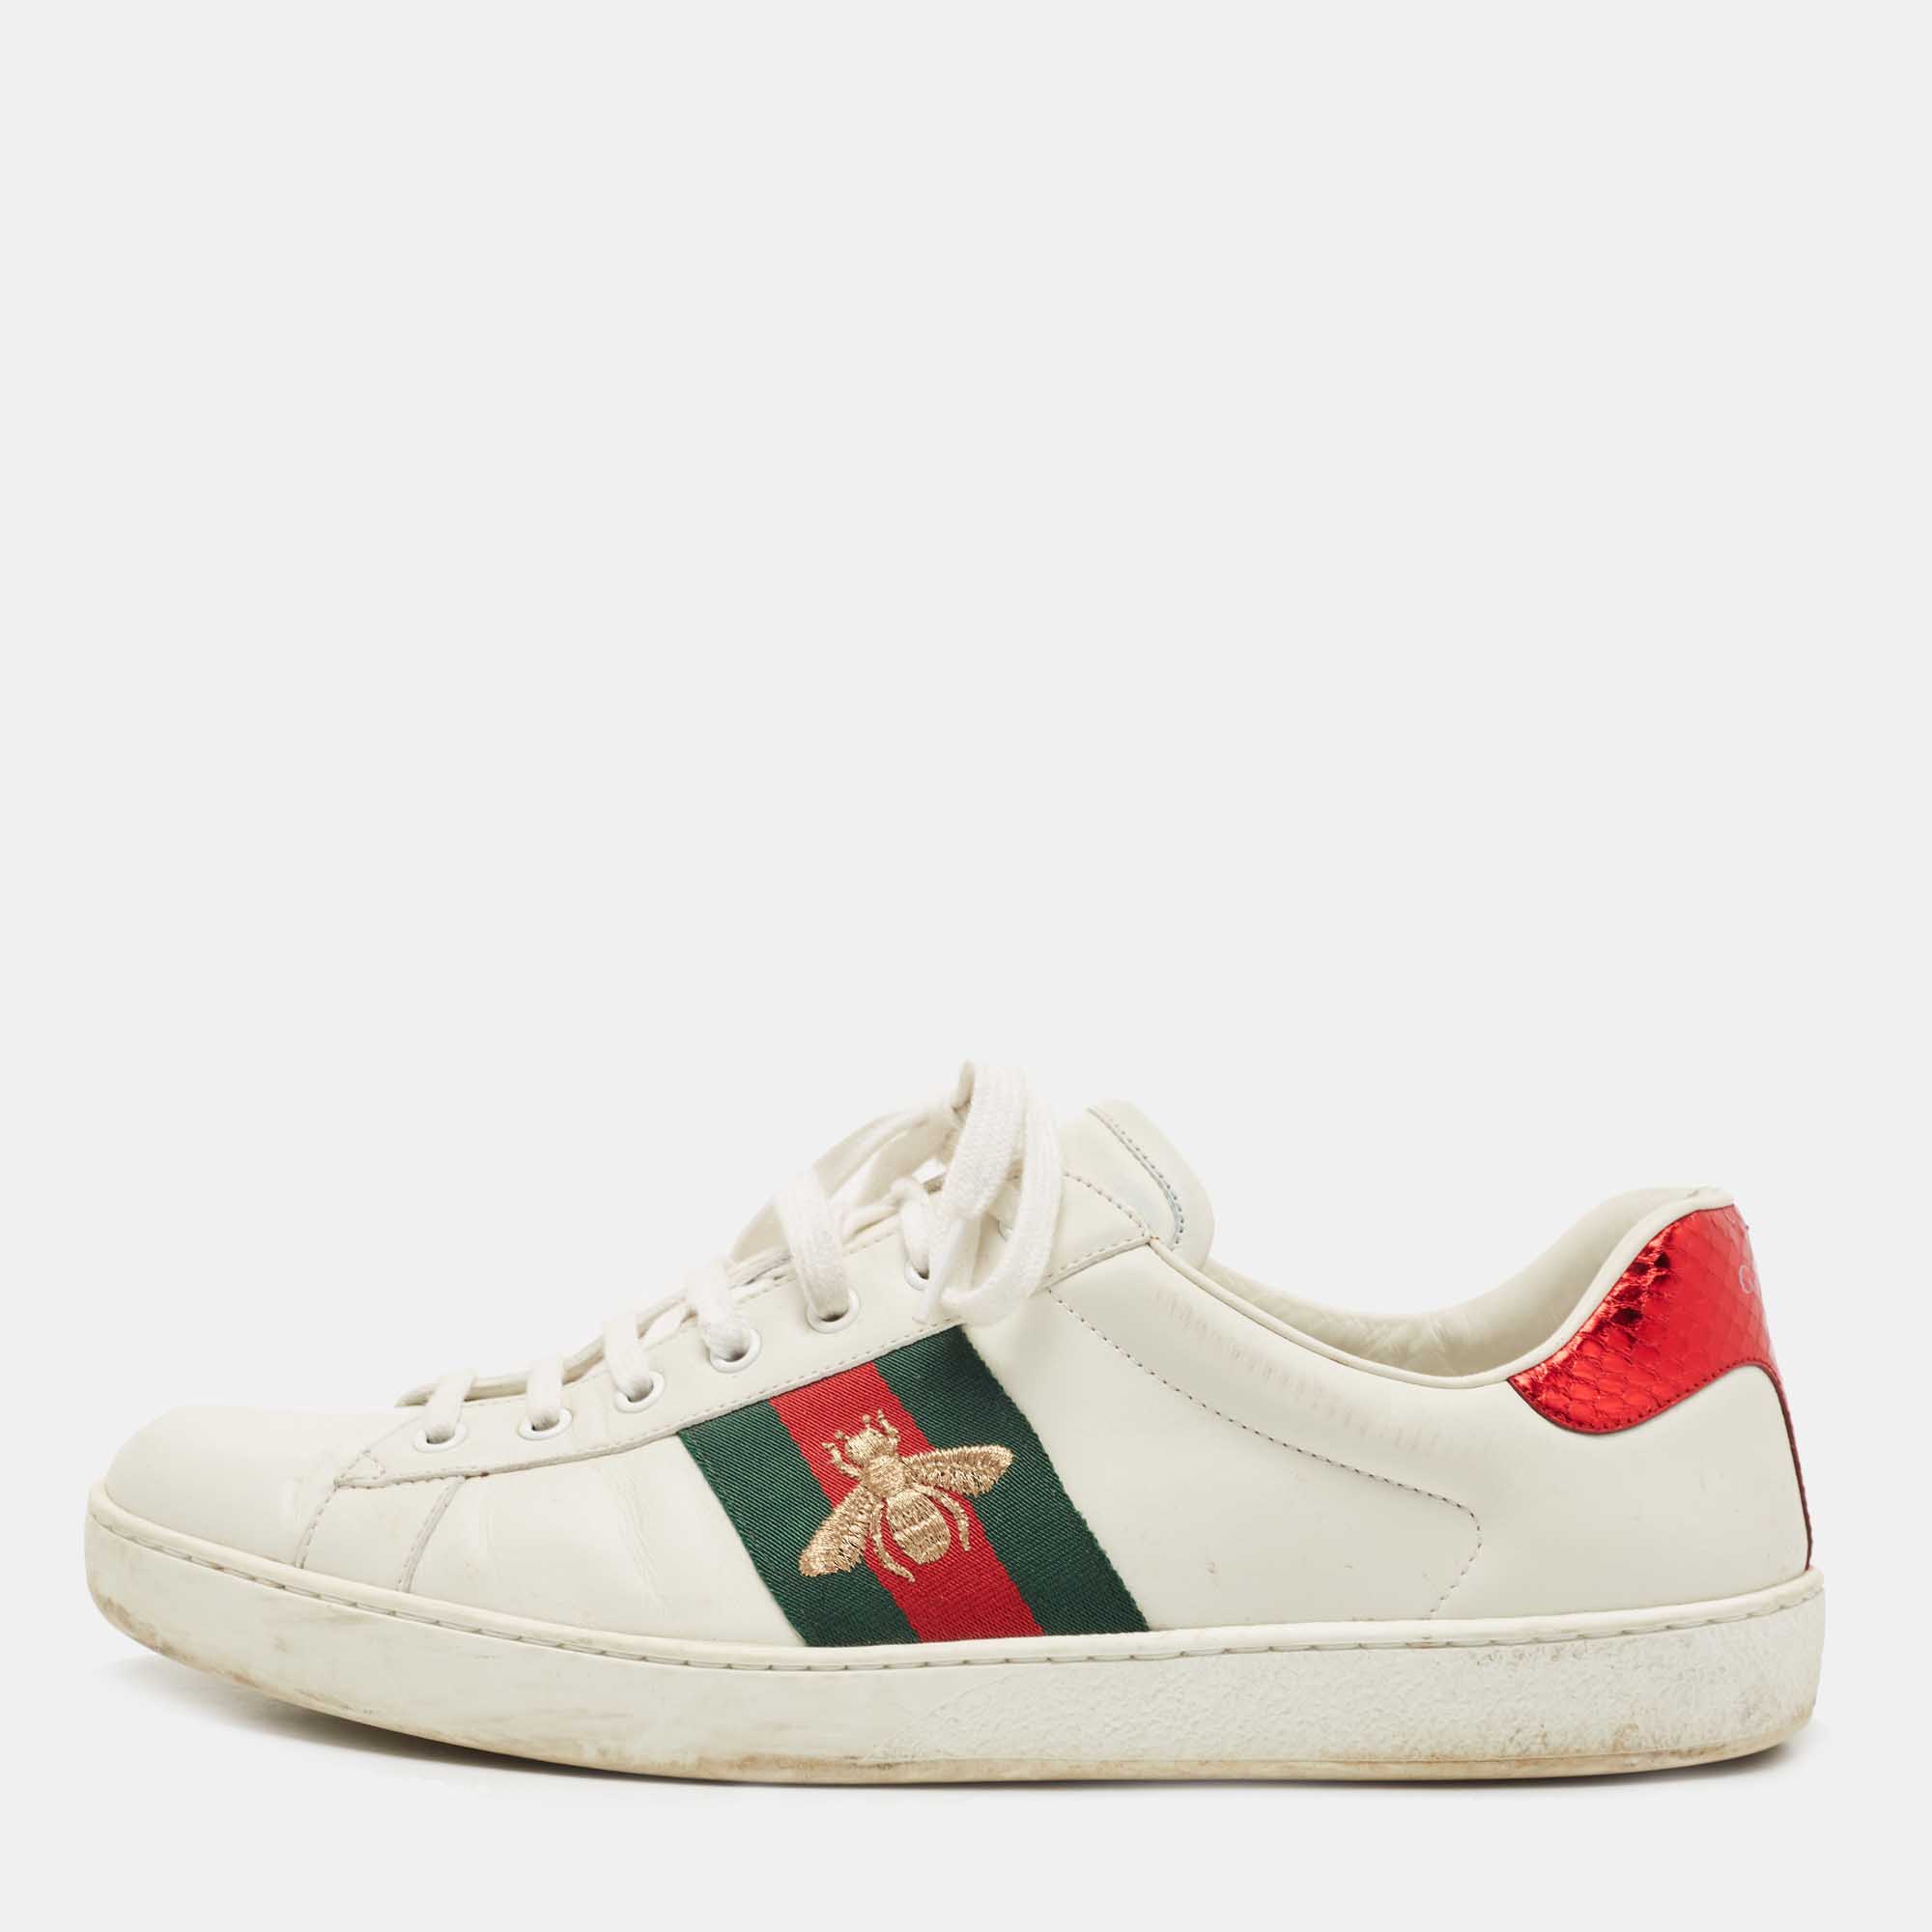 Gucci White Leather Embroidered Bee Ace Sneakers Size 45